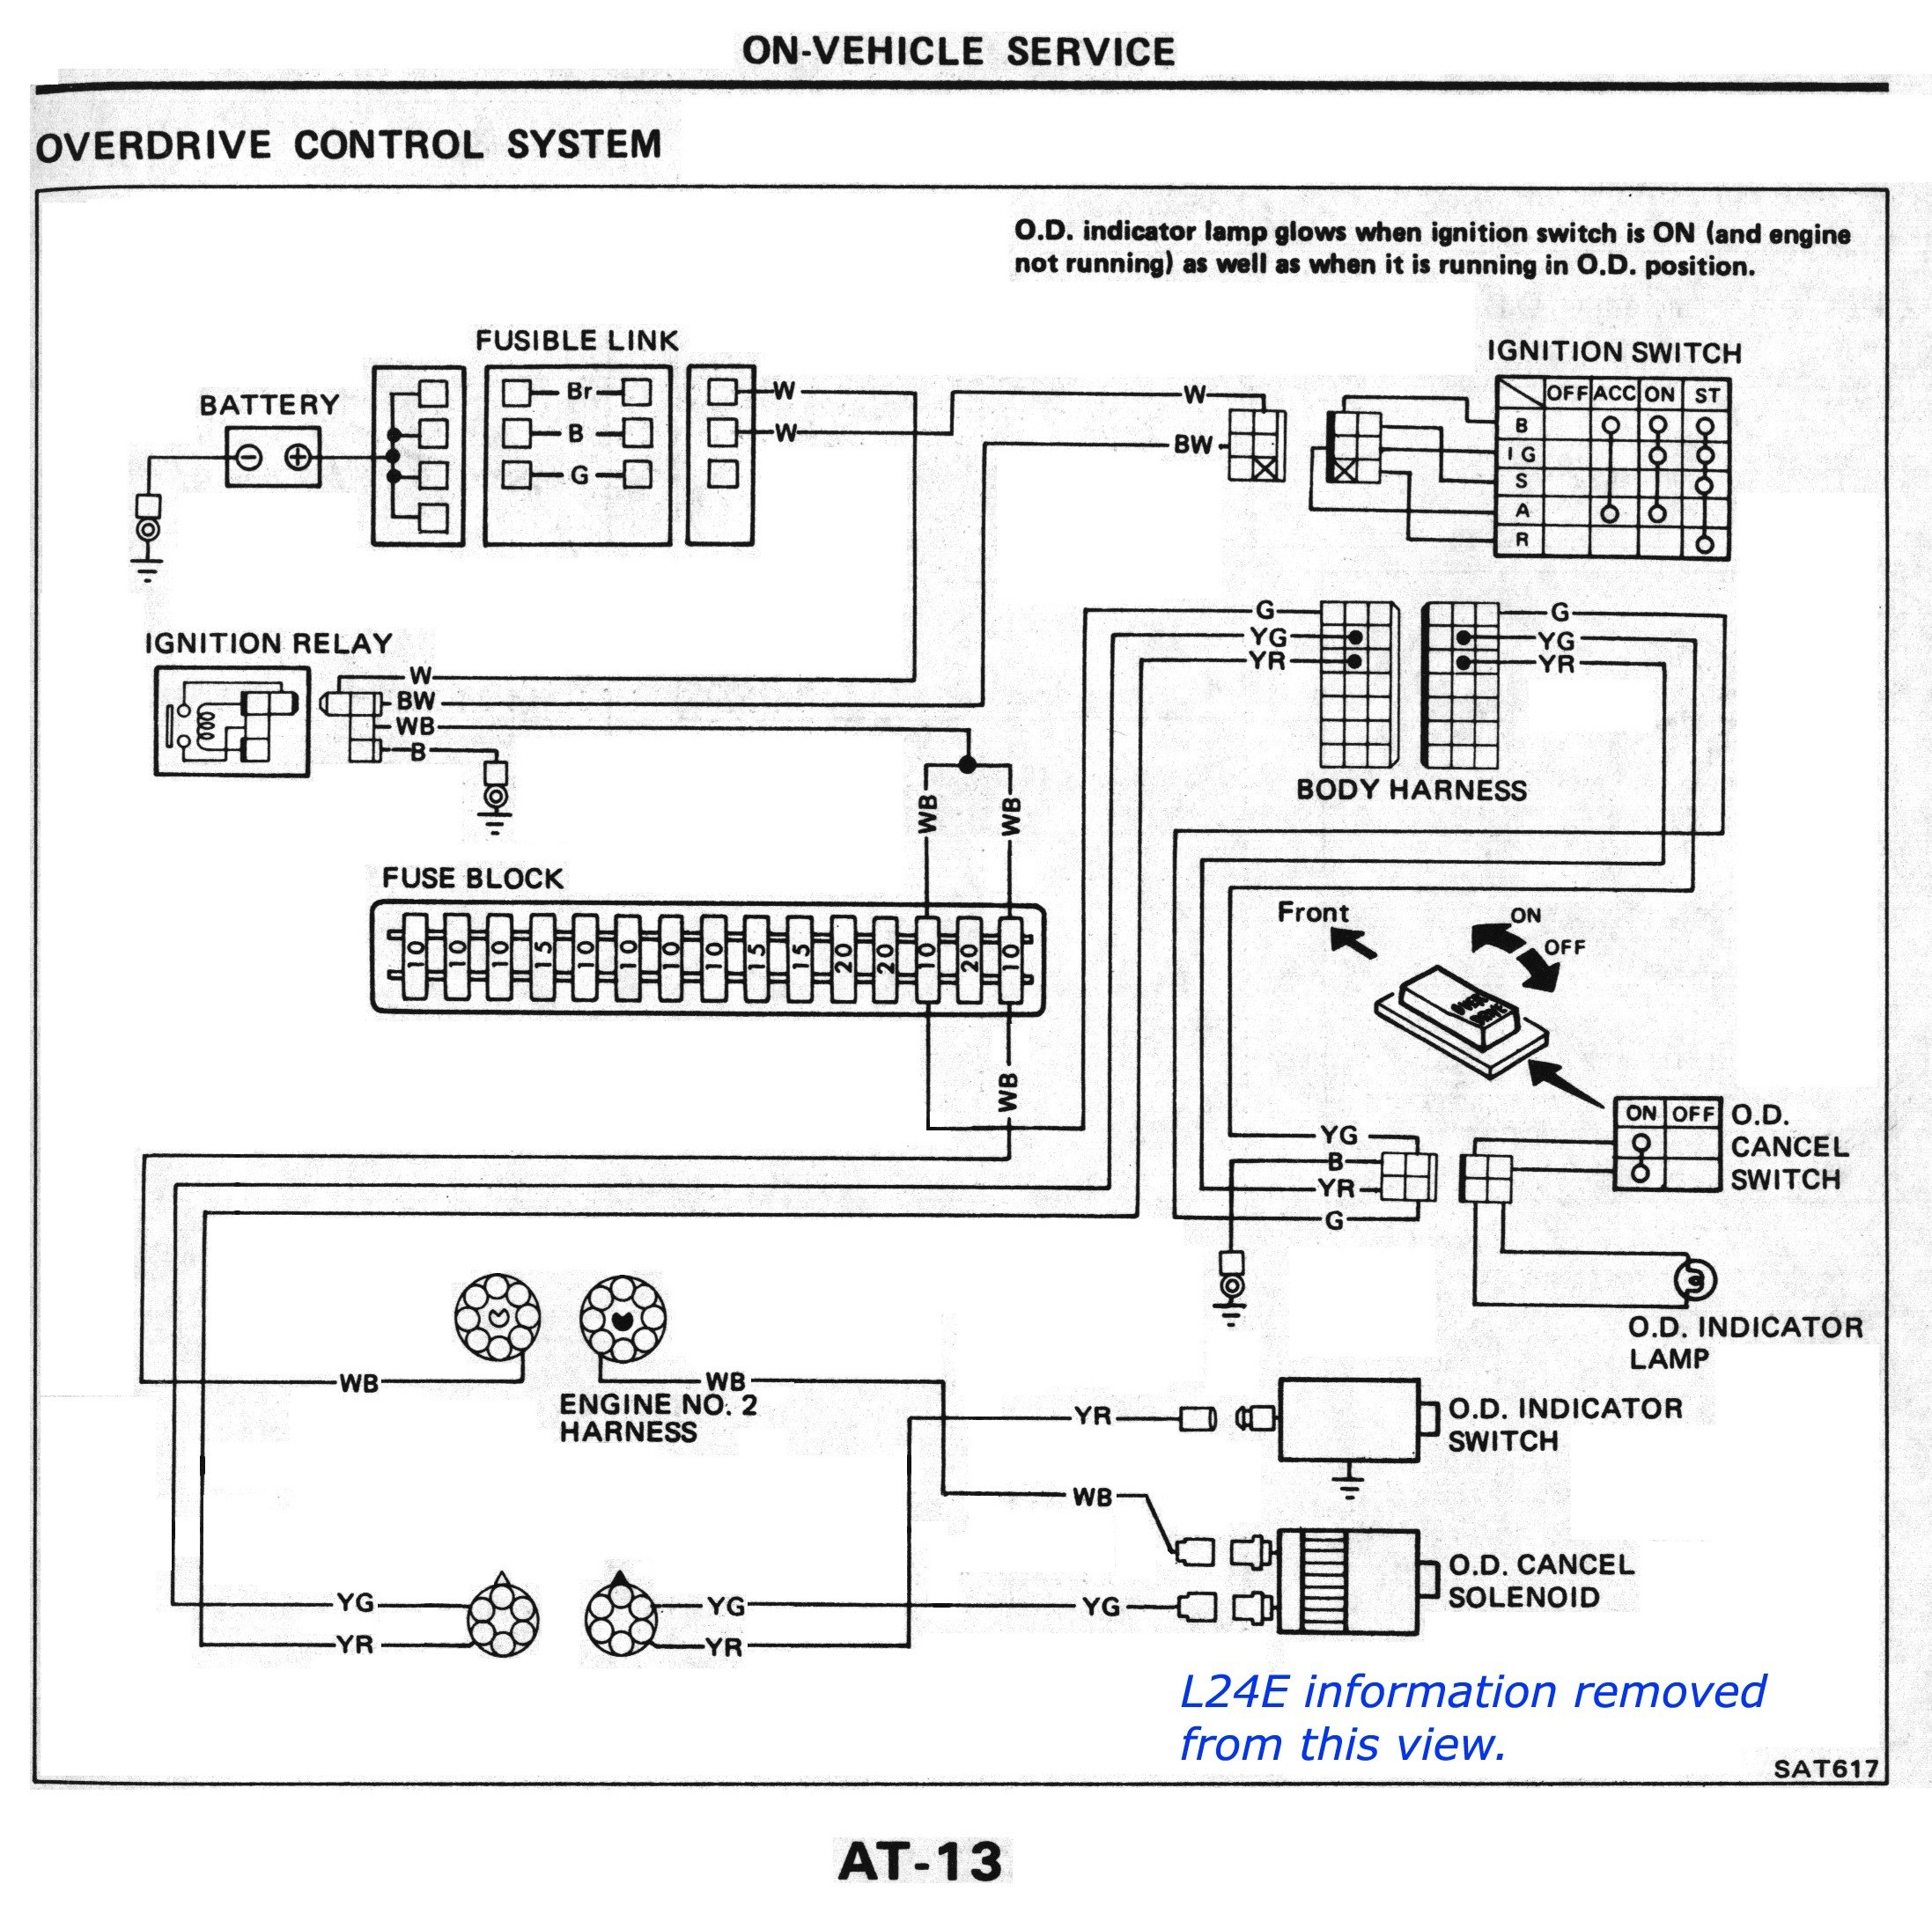 End Of Line Switch Wiring Diagram 1